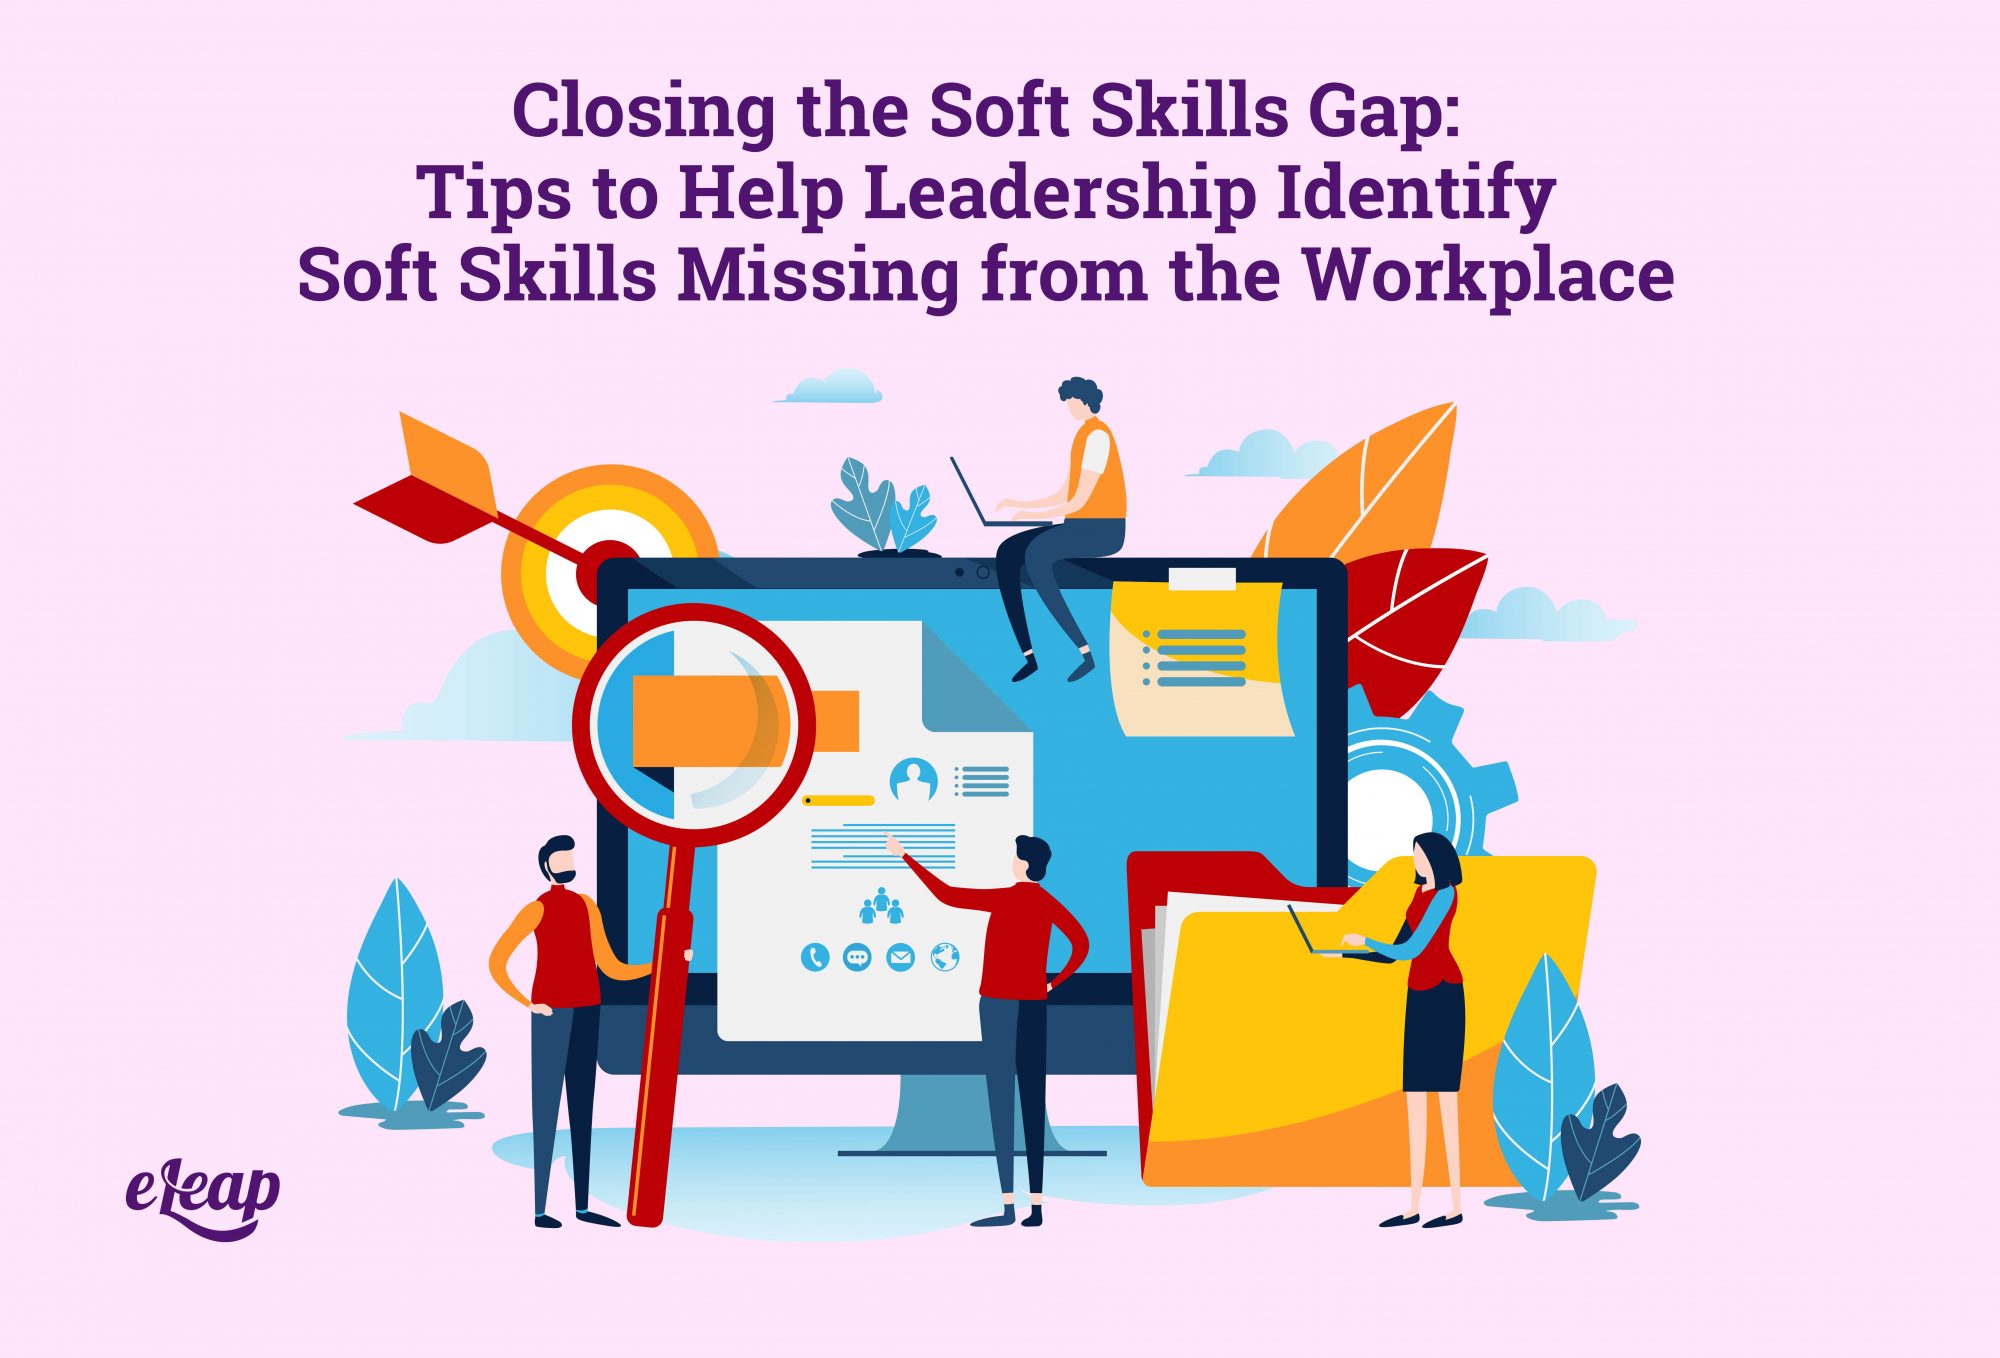 Closing the Soft Skills Gap: Tips to Help Leadership Identify Soft Skills Missing from the Workplace